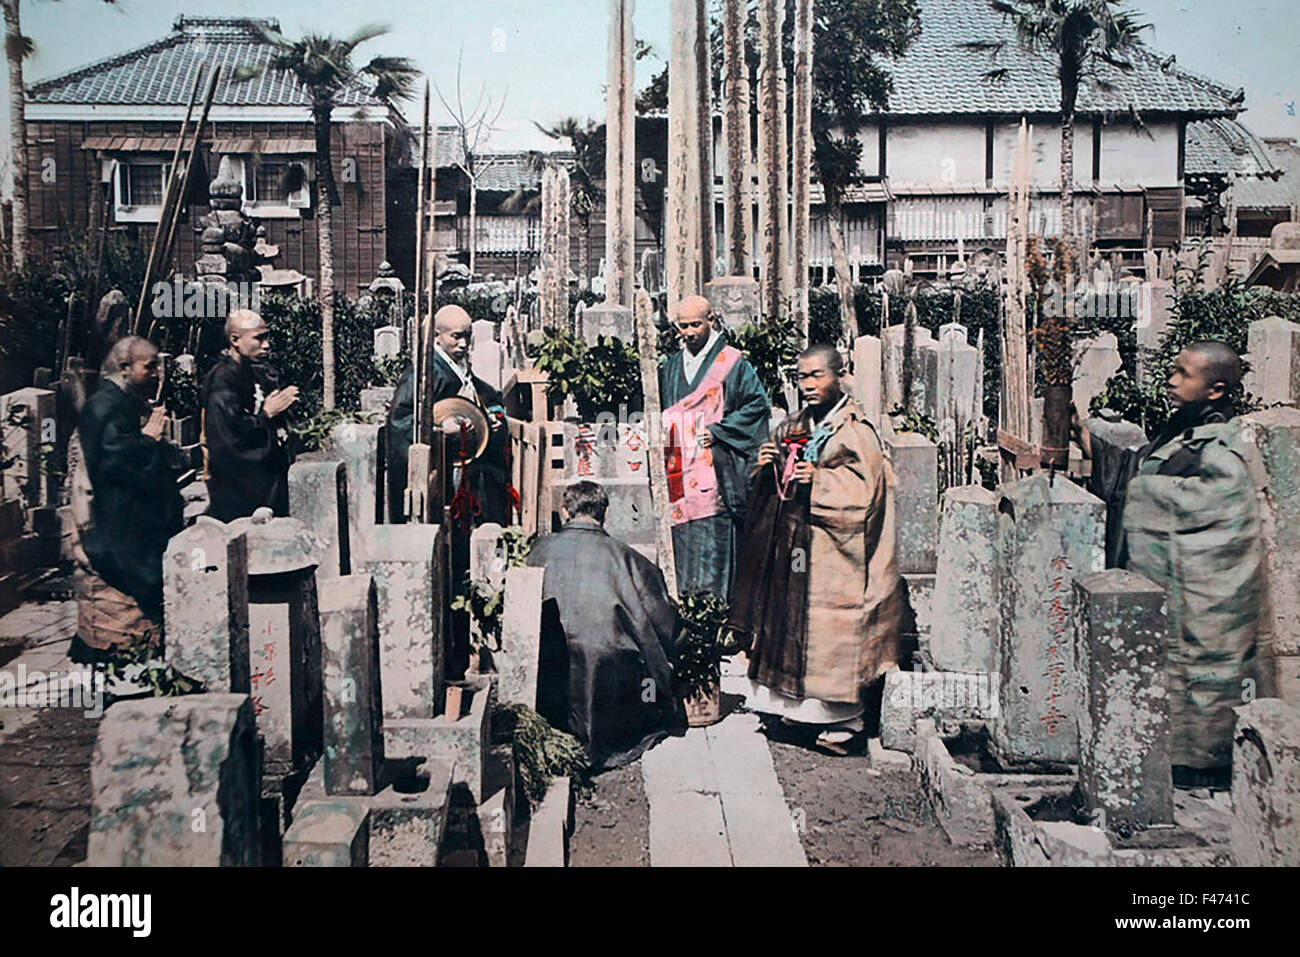 Japanese people at cemetery, Japan Stock Photo